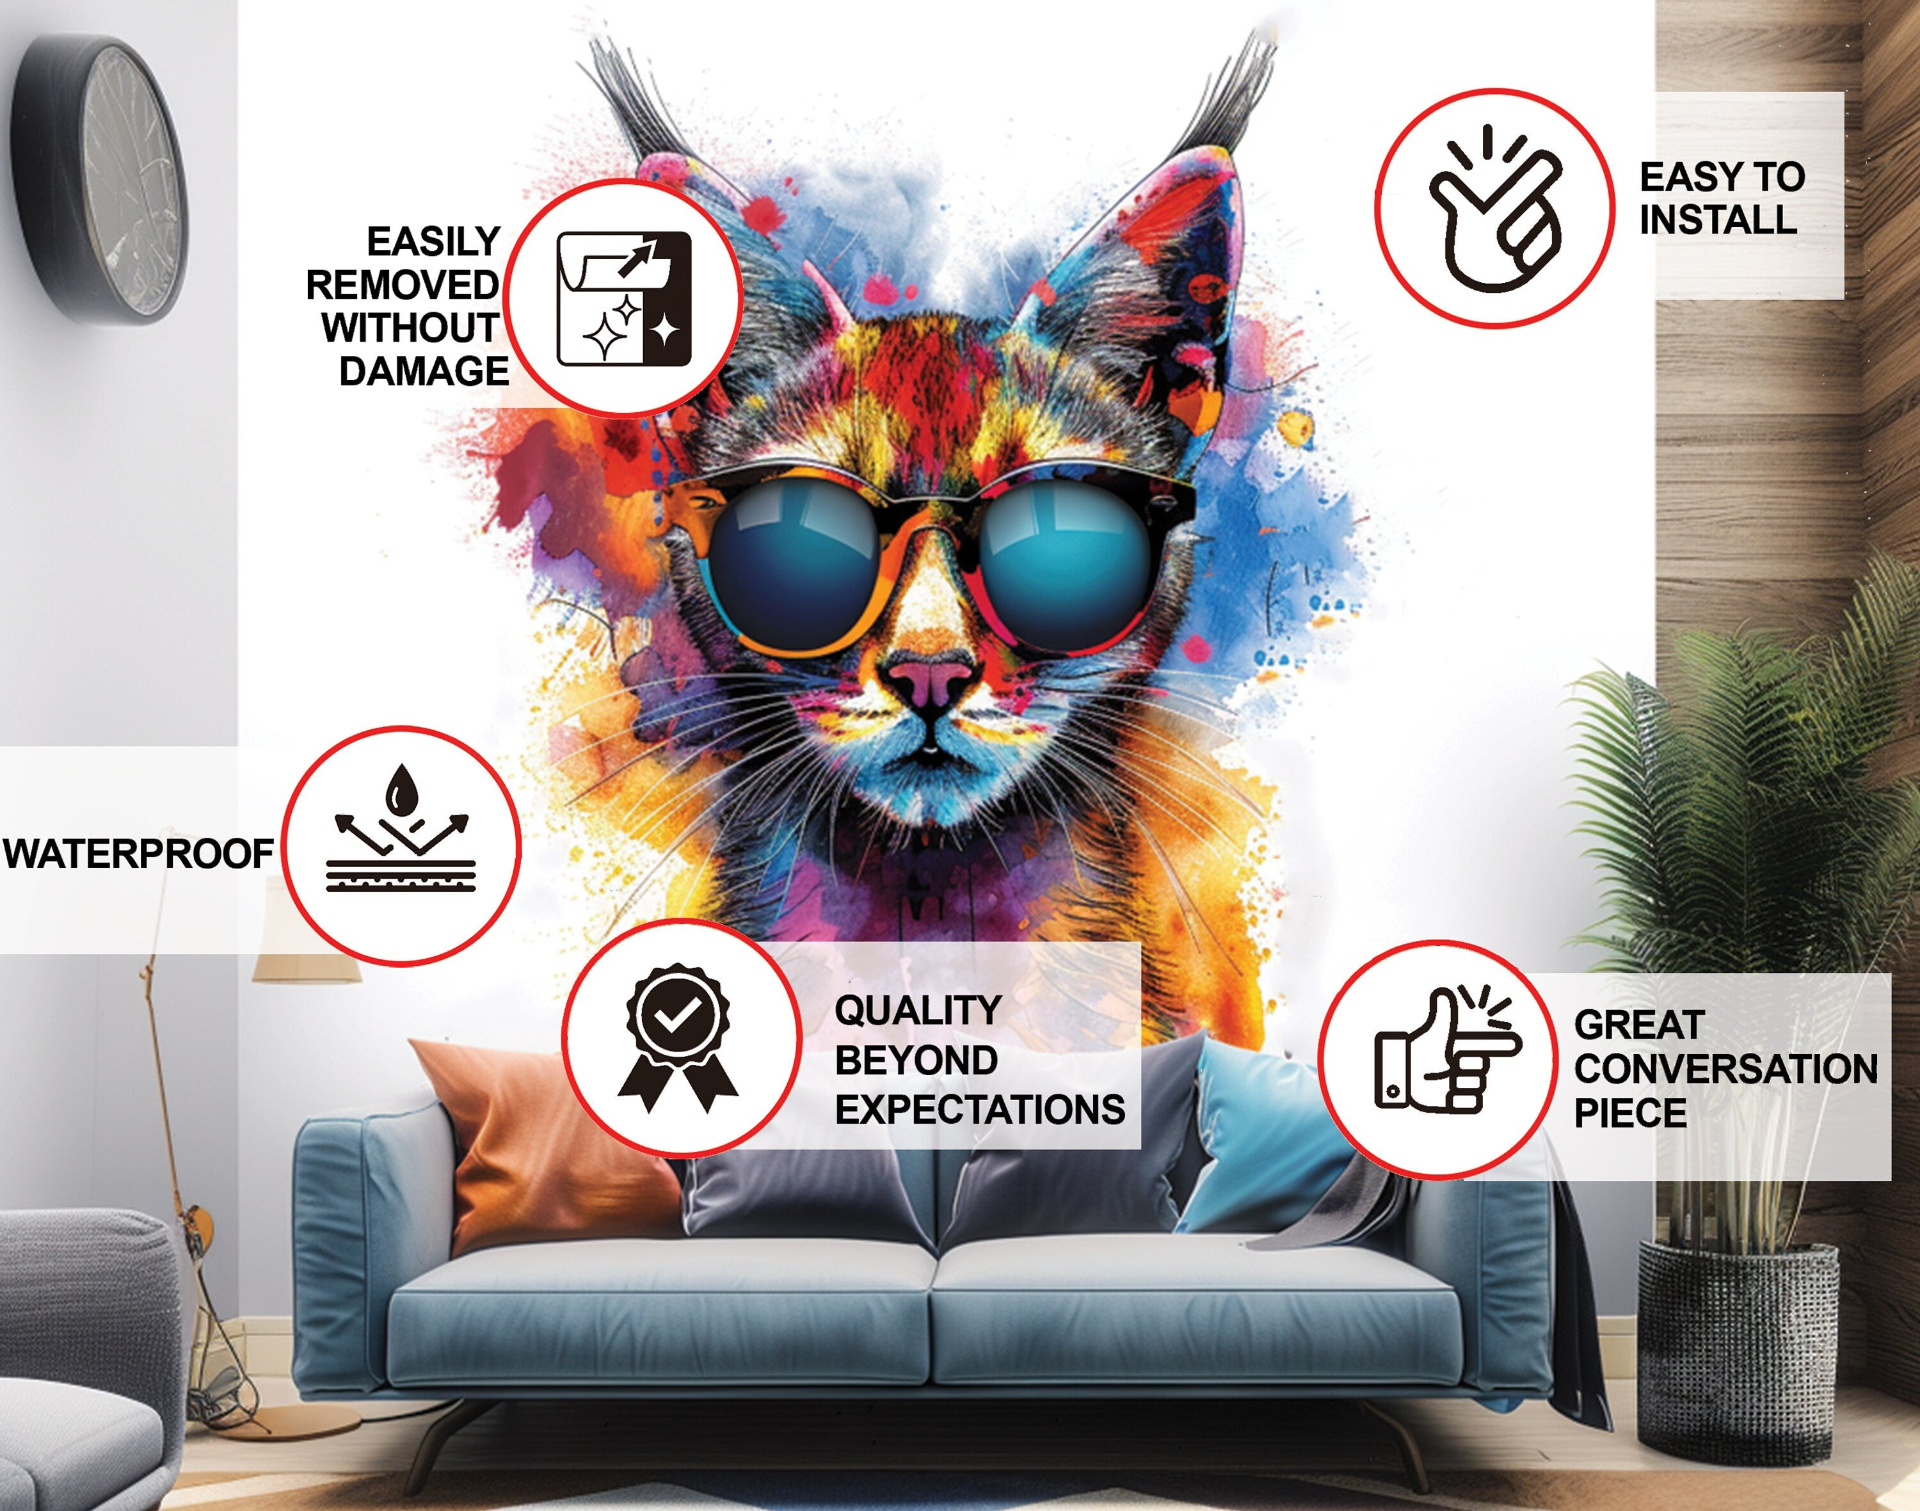 Vibrant Maine Coon Cat Wall Sticker with Sunglasses | Colorful Modern Kitten Art Decal | Artistic Kitty Decor | Unique Cat Lover Gift Idea, Goodies N Stuff